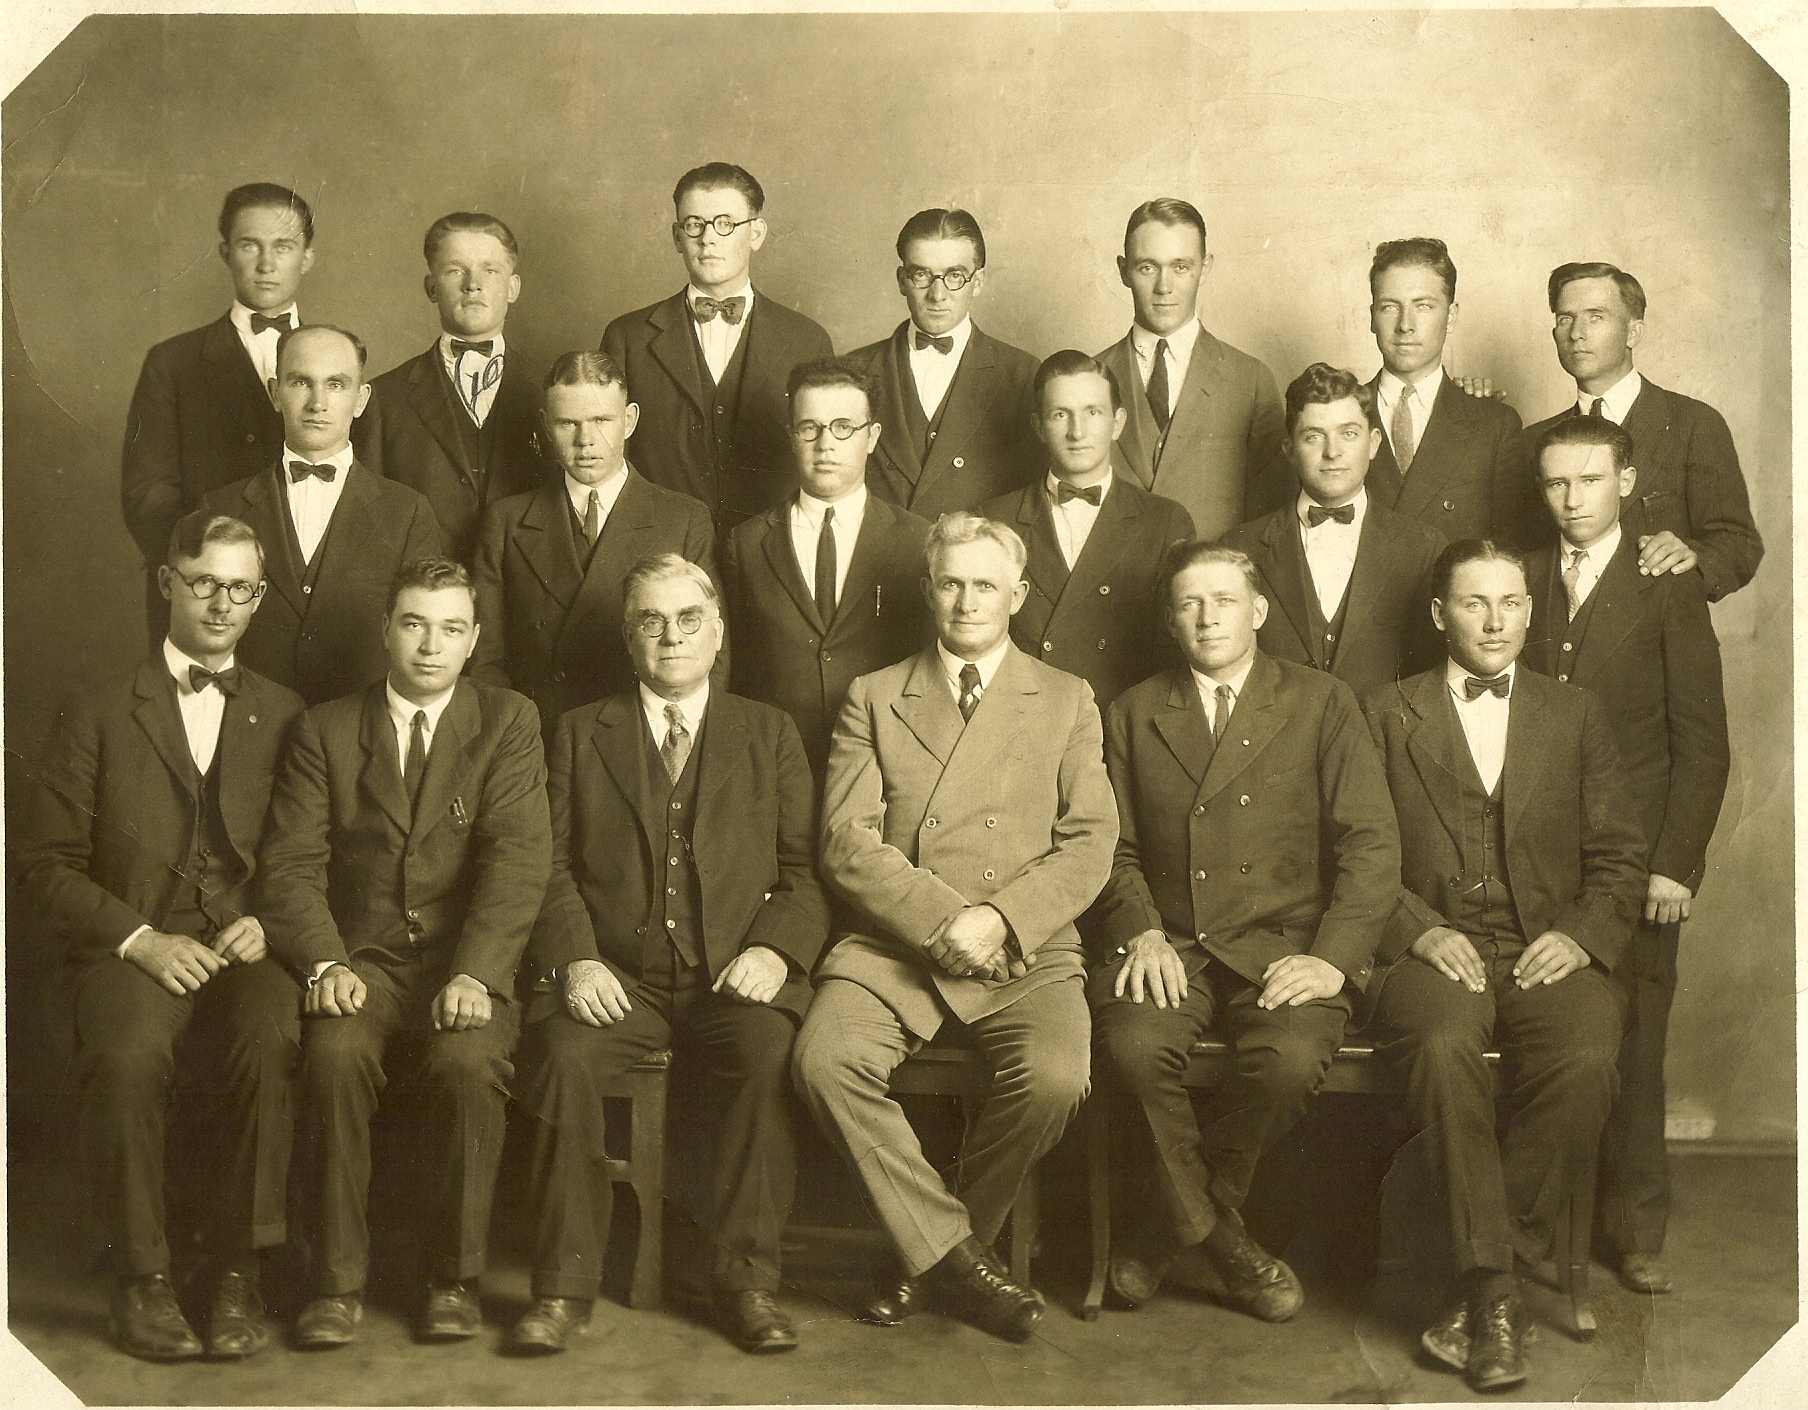 Missionaries from the Southern States Mission about 1926, Between 1925 October – 1927 November